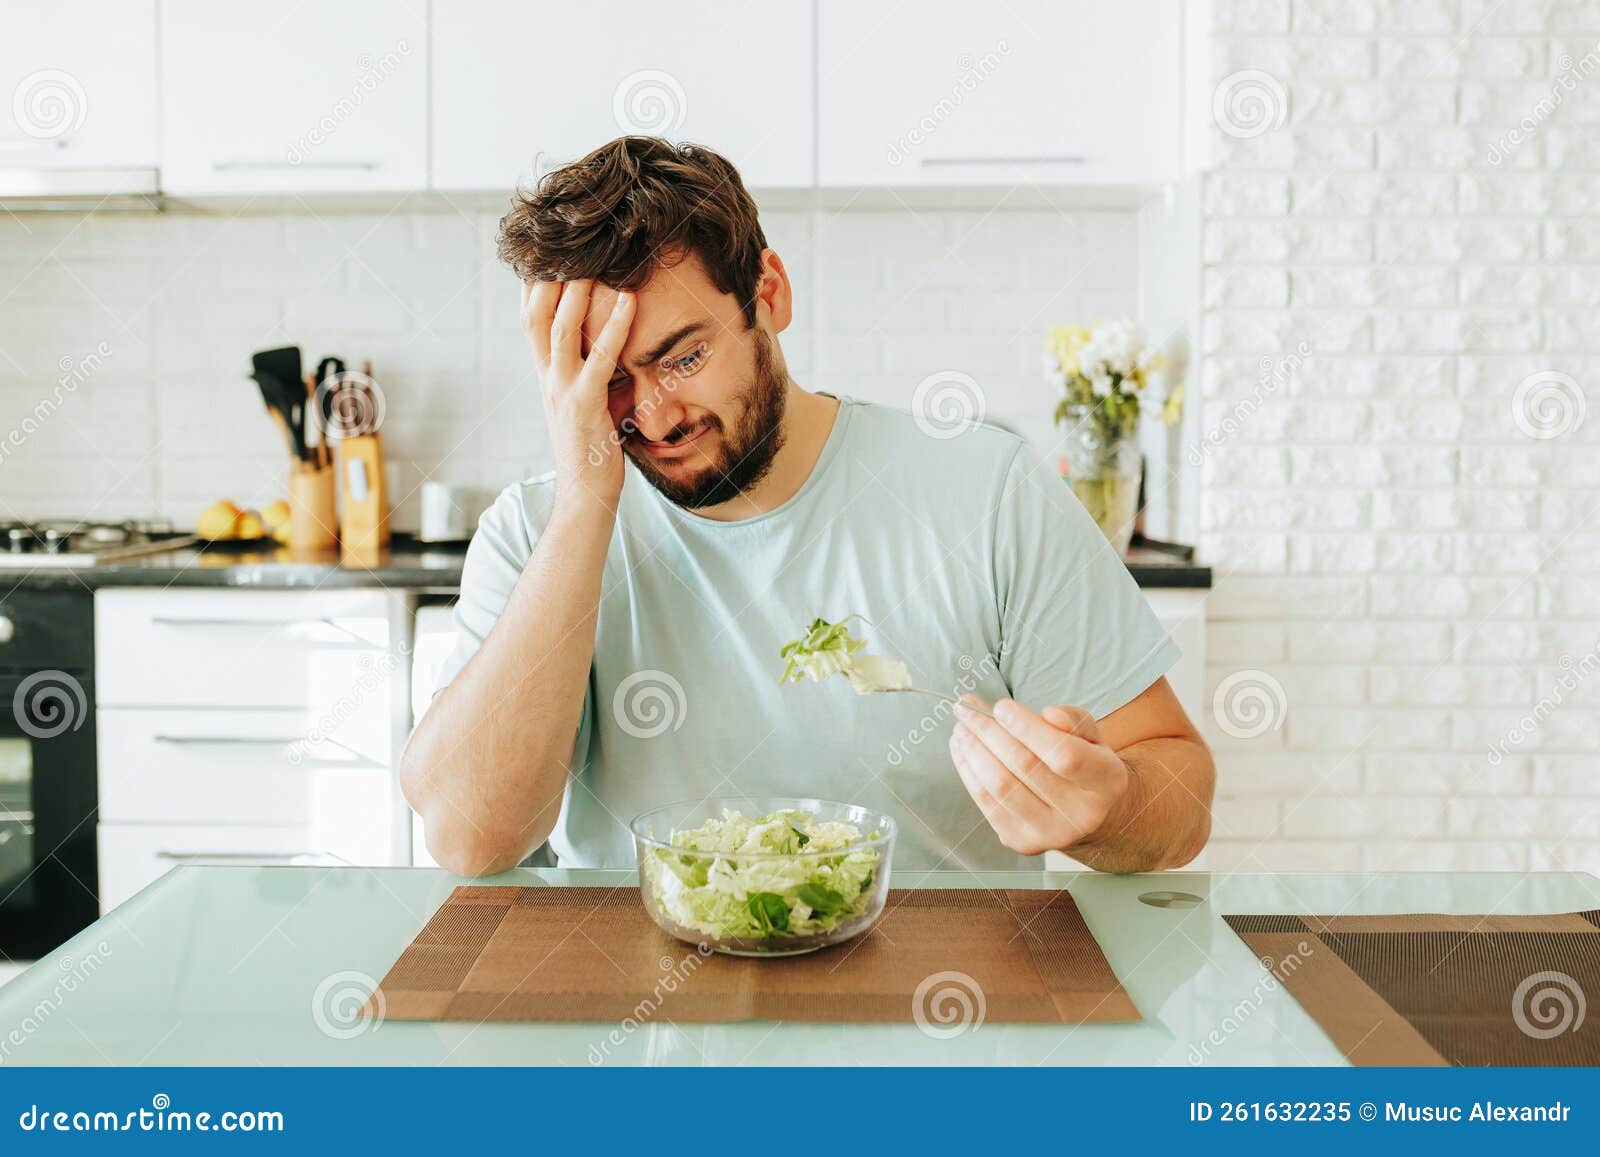 sad young man look longingly at salad hold fork with greens in hand plate salad in front of him.